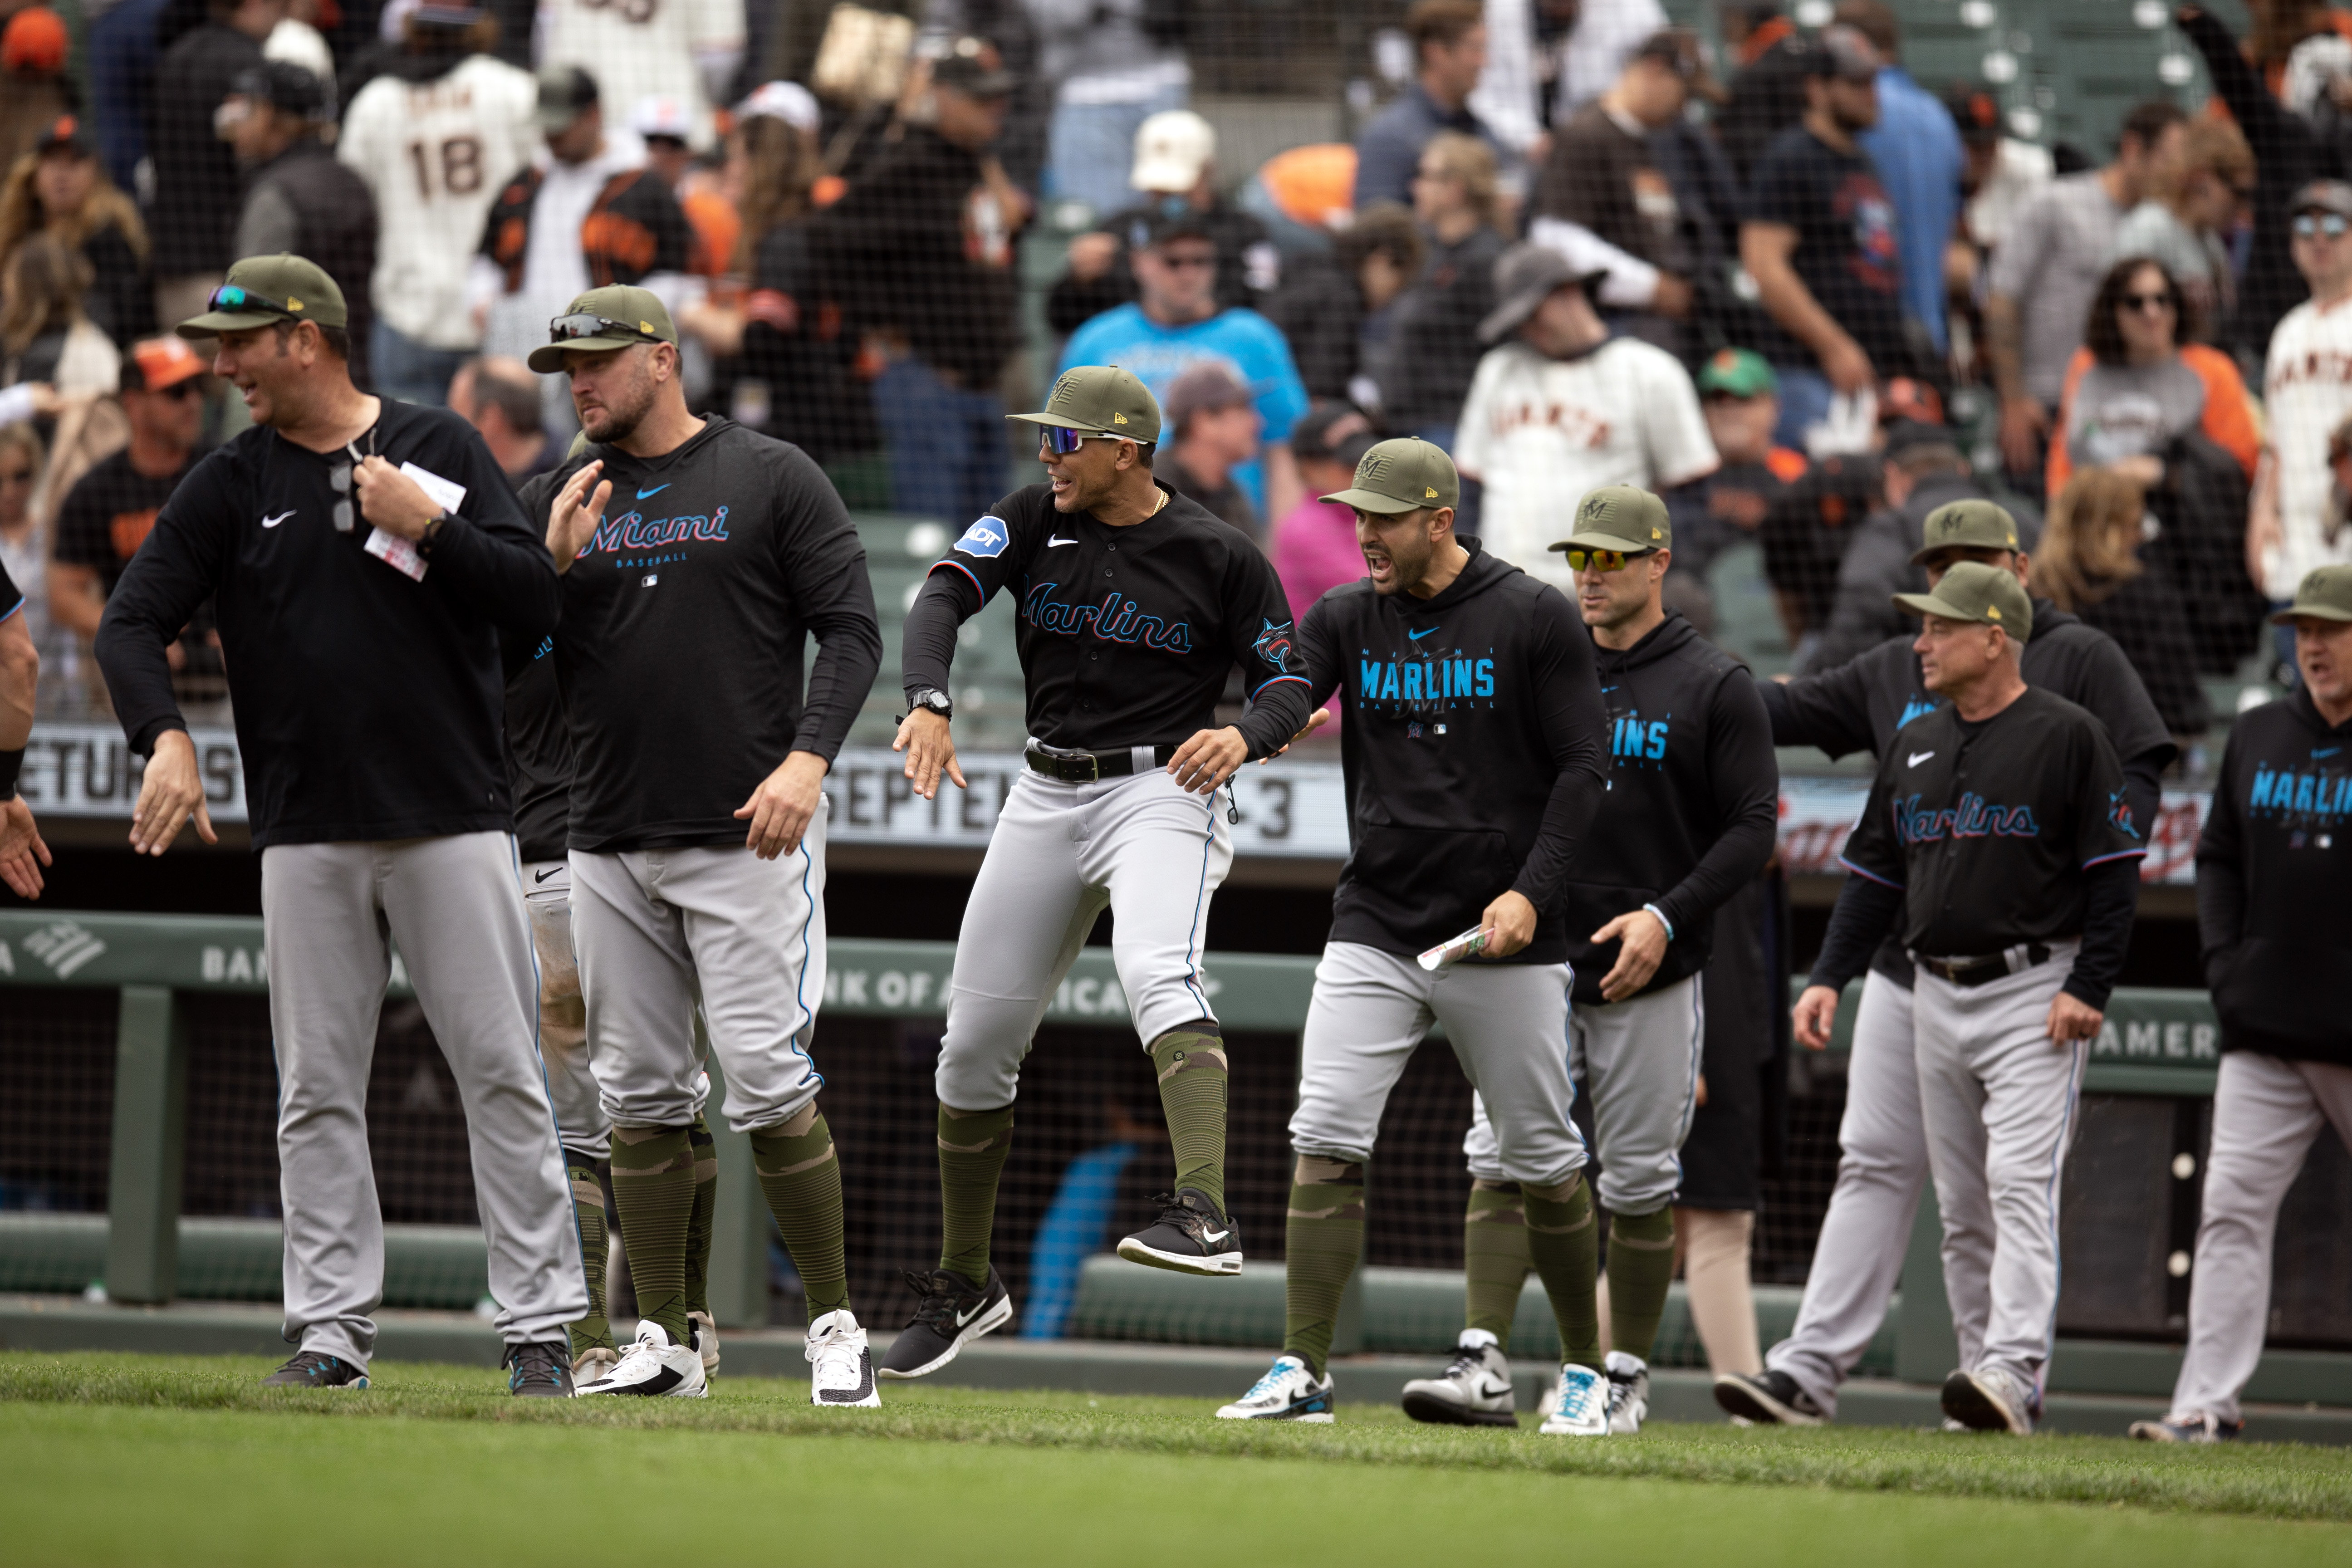 San Francisco, California, USA; Miami Marlins players celebrate their 1-0 victory over the San Francisco Giants at Oracle Park